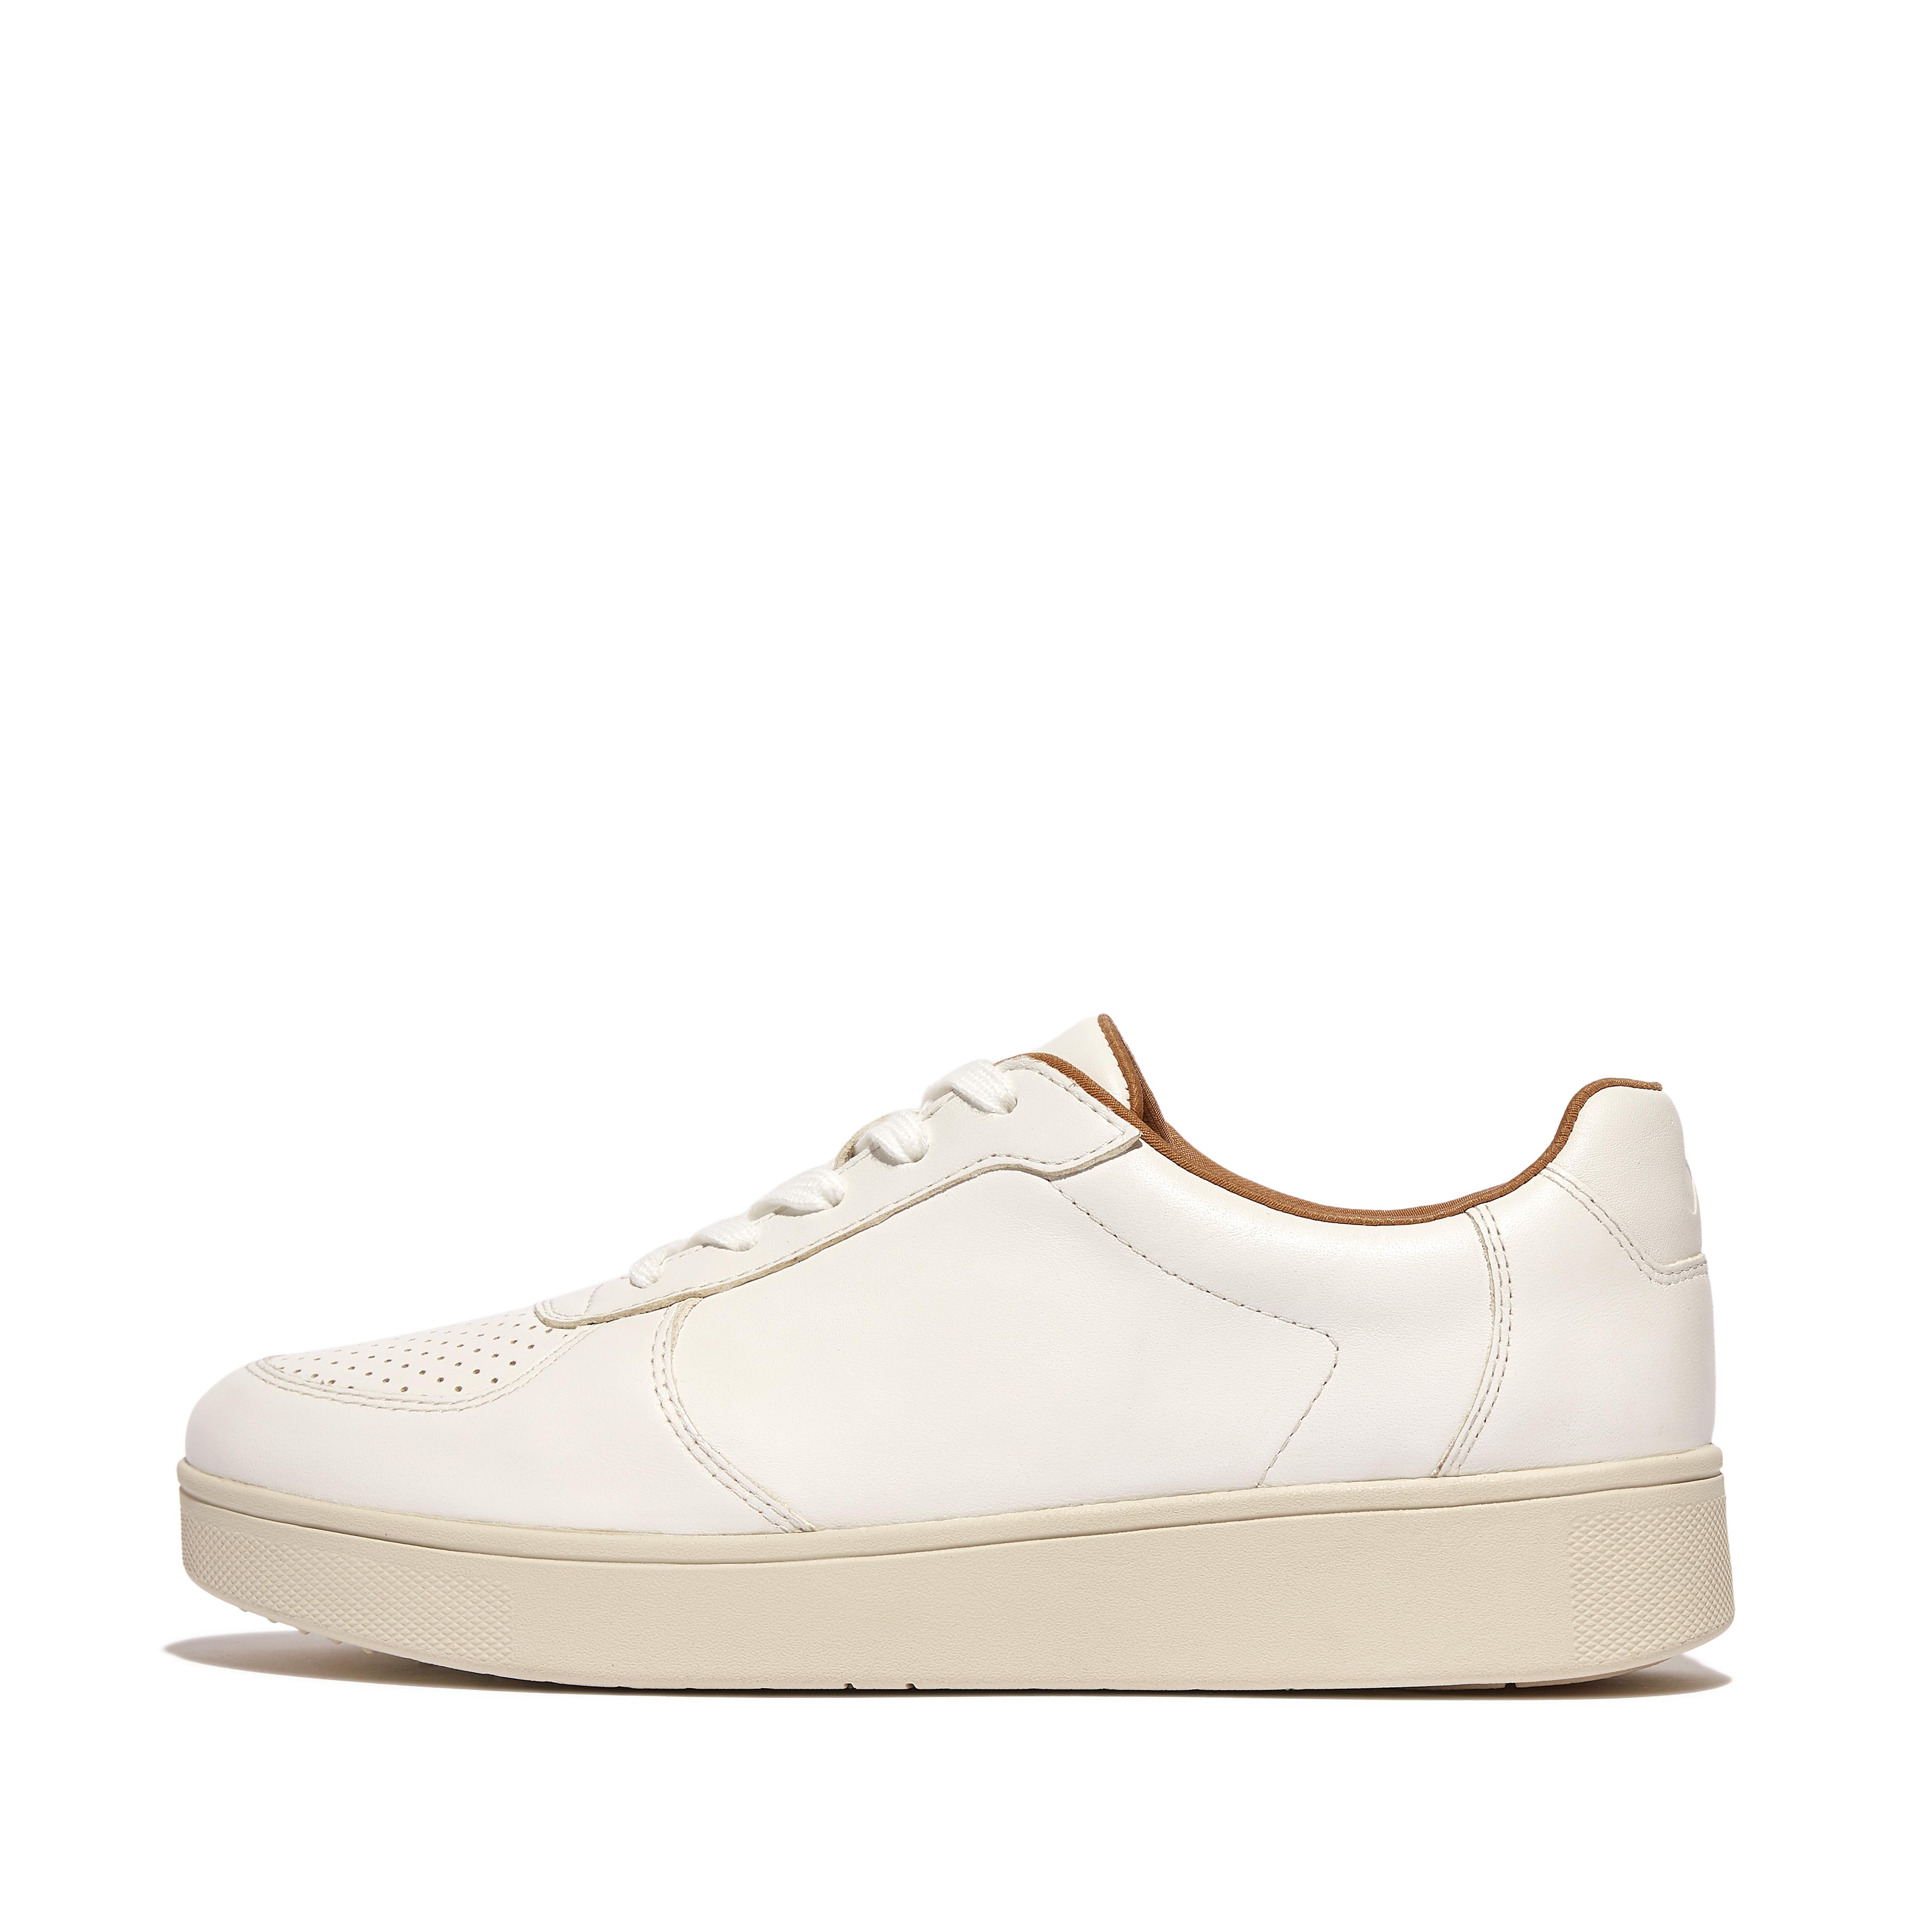 Fitflop Perf Leather Panel Sneakers,Urban White